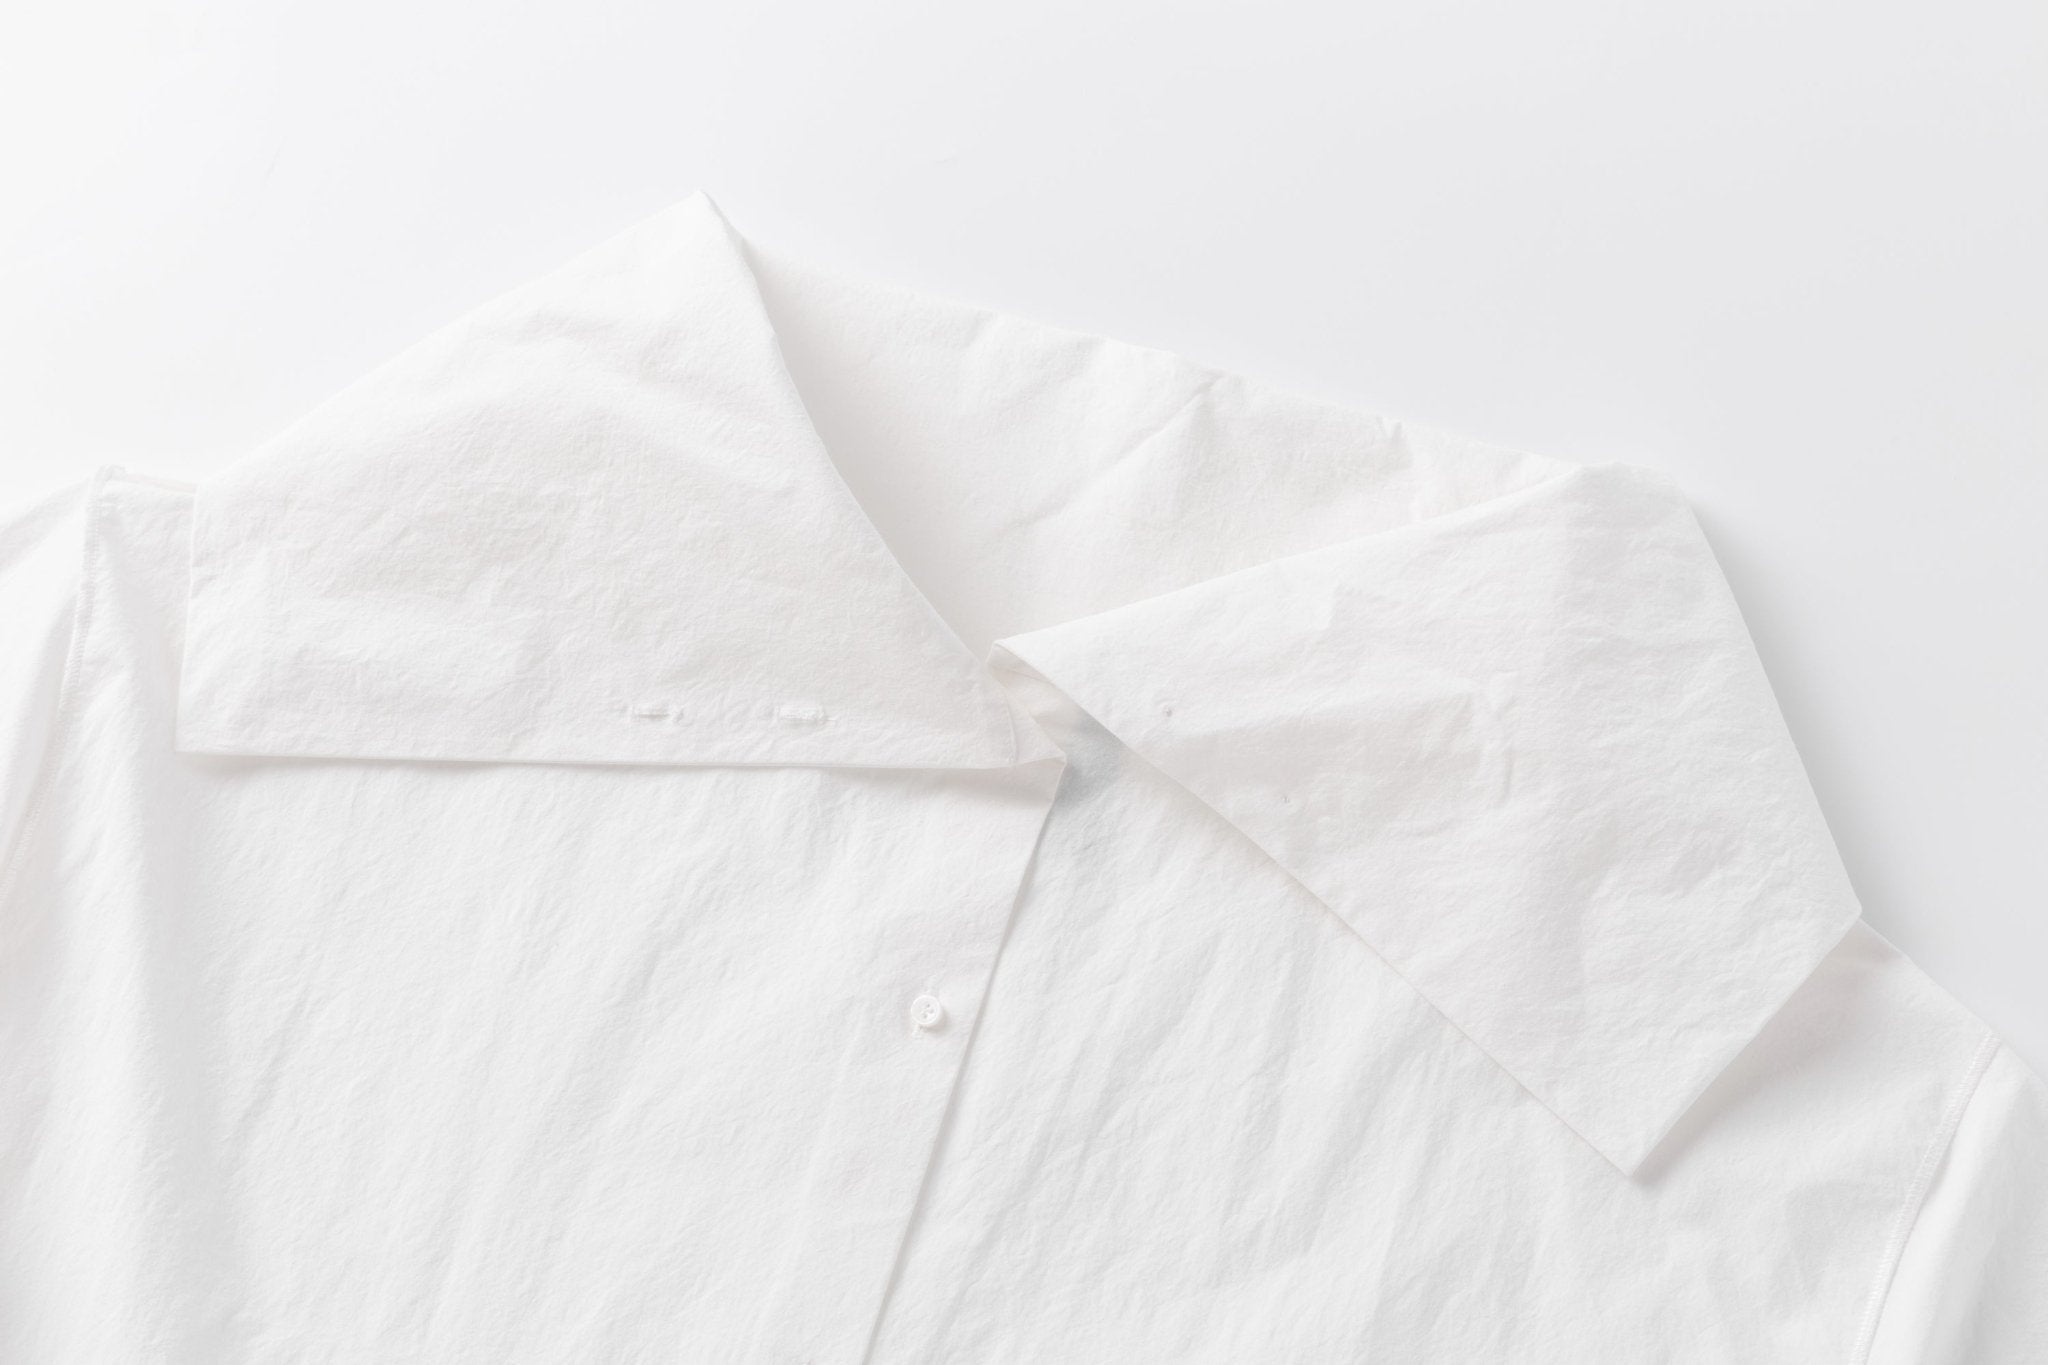 Ther. White Hunnel-neck cotton shirt | MADA IN CHINA